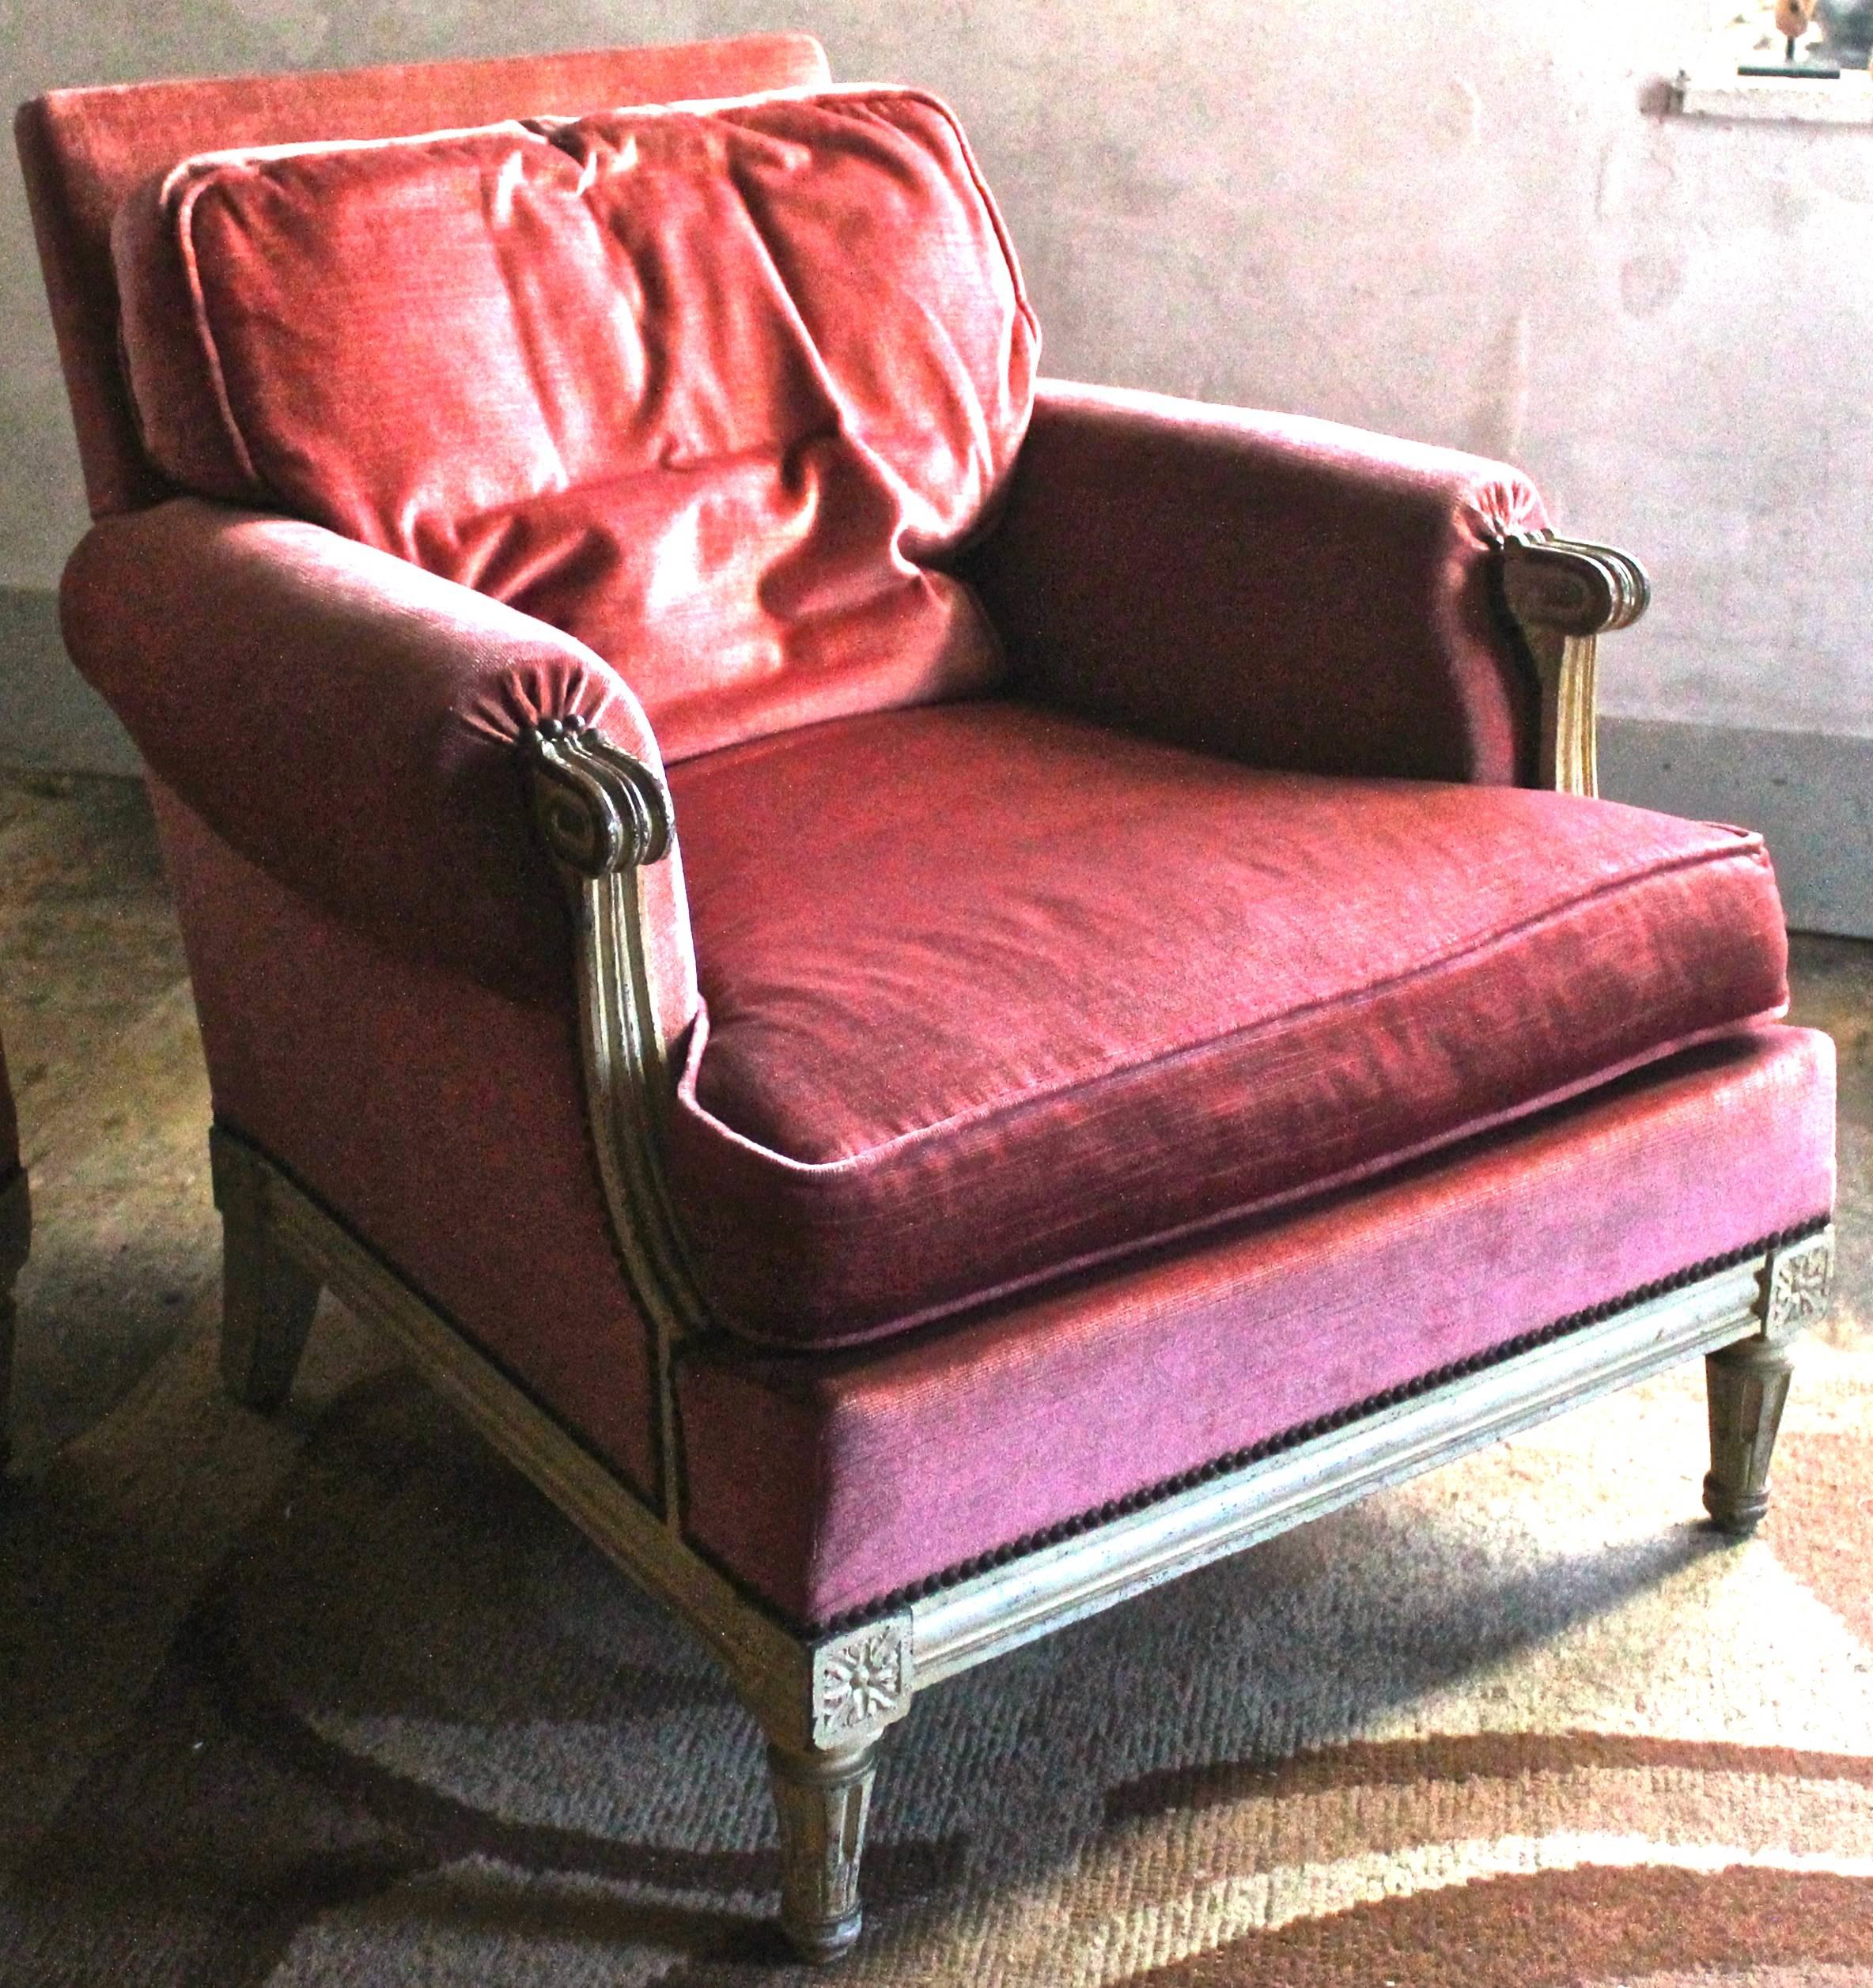 Hand-Crafted Maurice Hirsch Sofa and Armchairs, 1940s, Louis XVI Style For Sale